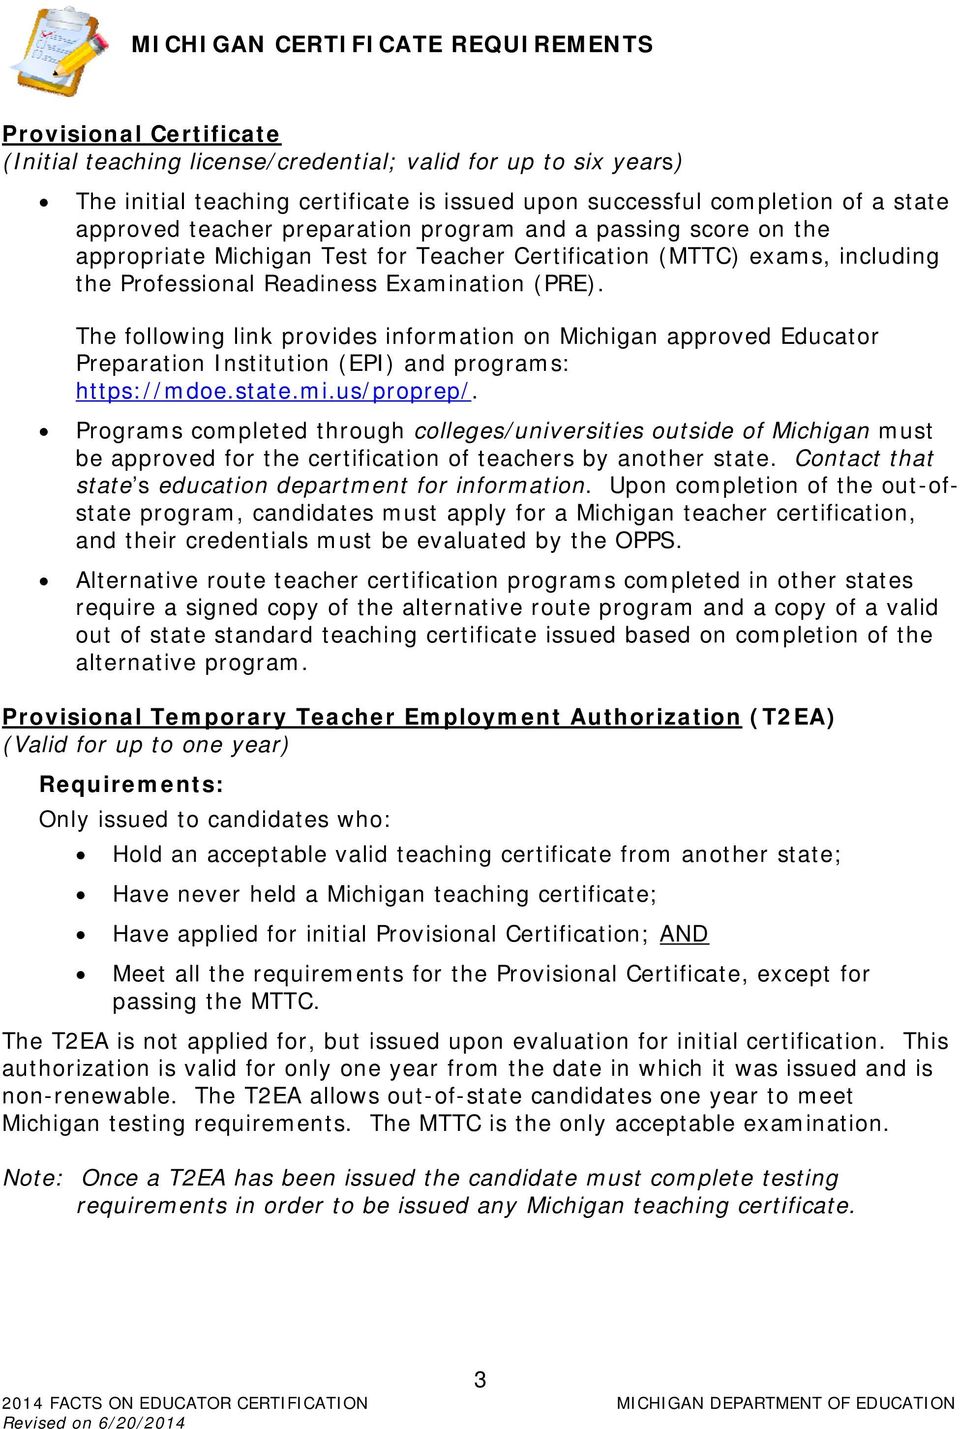 The following link provides information on Michigan approved Educator Preparation Institution (EPI) and programs: https://mdoe.state.mi.us/proprep/.